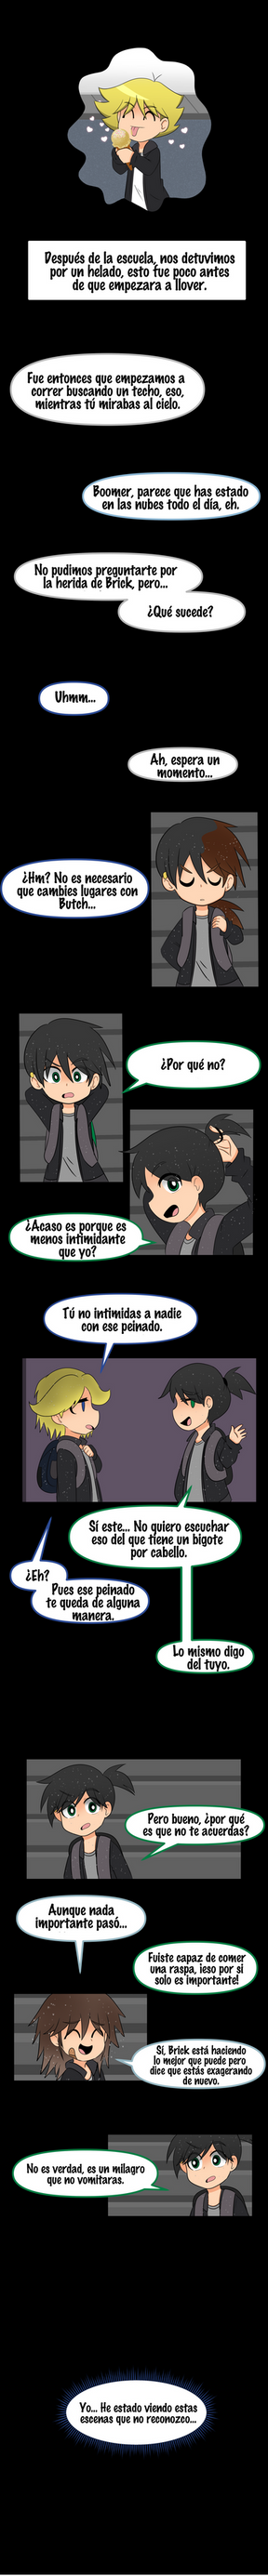 Capitulo 1: Incidente pg 48